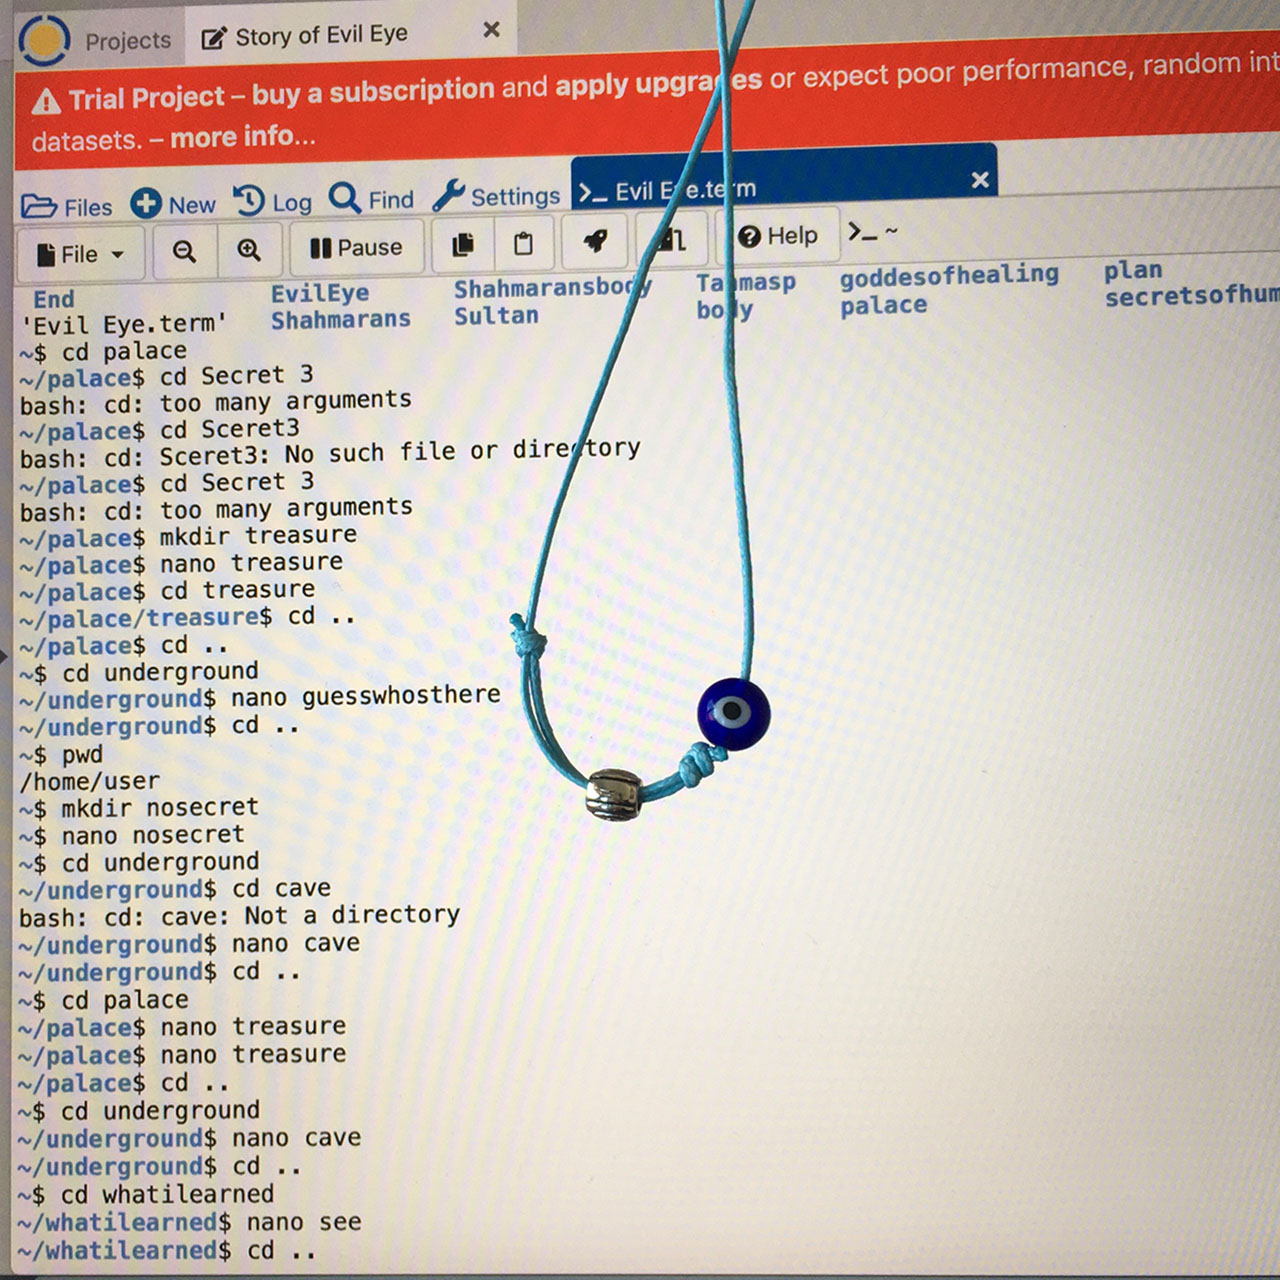 In front of a computer screen, an evil eye bracelet is hanging on a blue string. The screen shows some moire interference, and there is a tab open that is called 'Story of Evil Eye' and that contains bash commands.